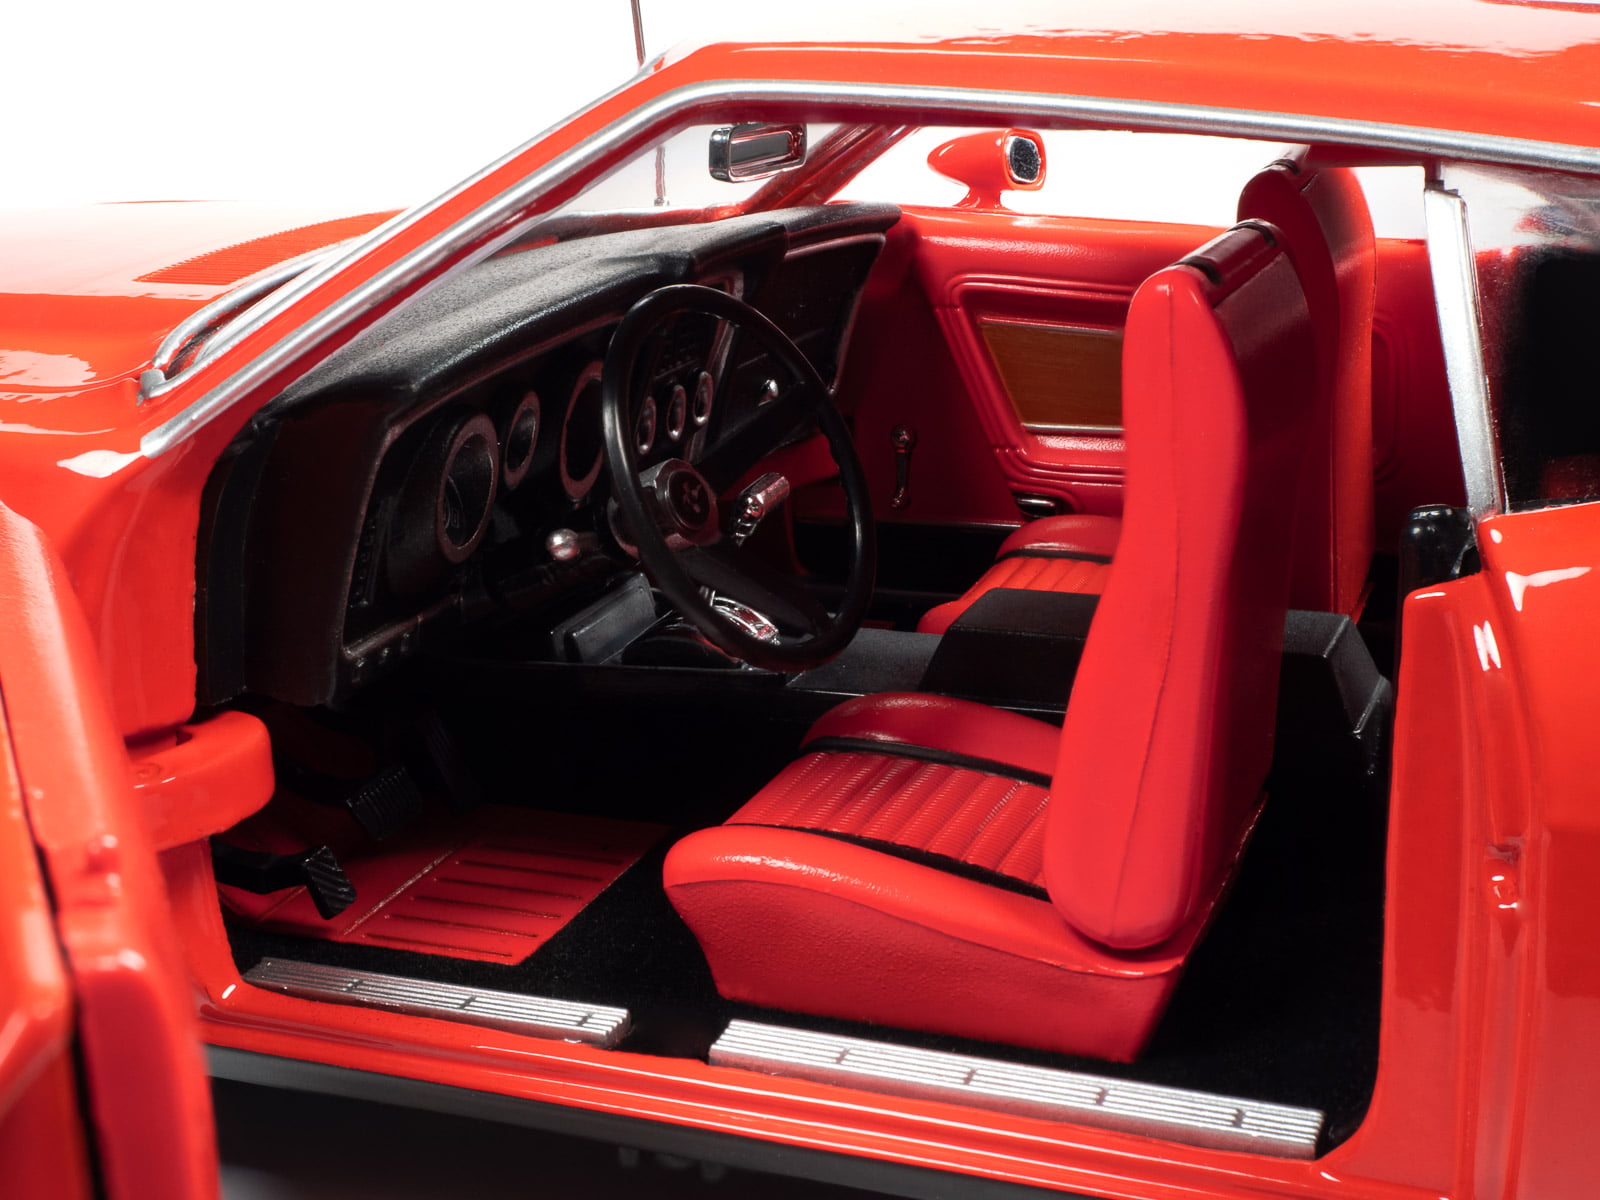 1971 Ford Mustang Mach 1 Bright Red with Red Interior (James Bond 007)  